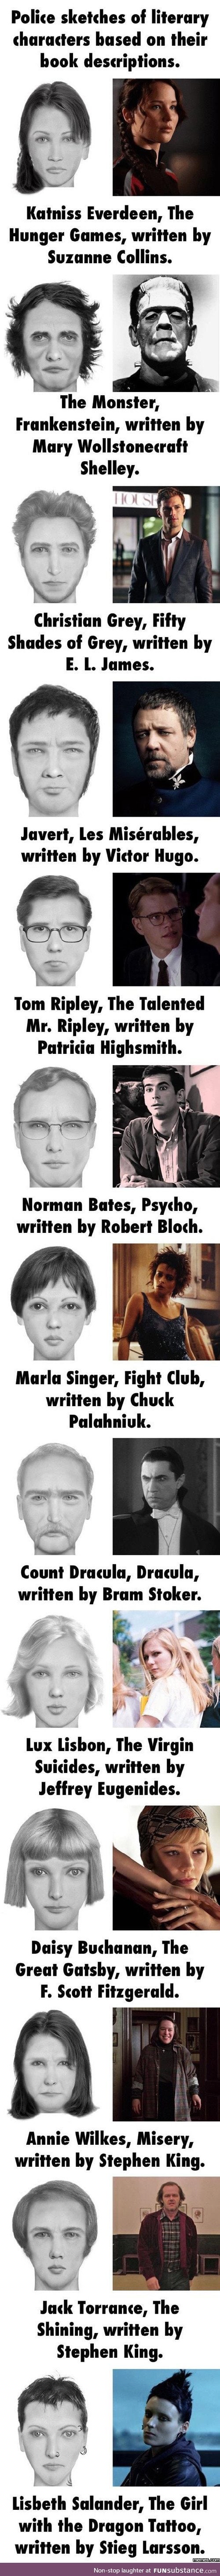 If Movie characters were like the book